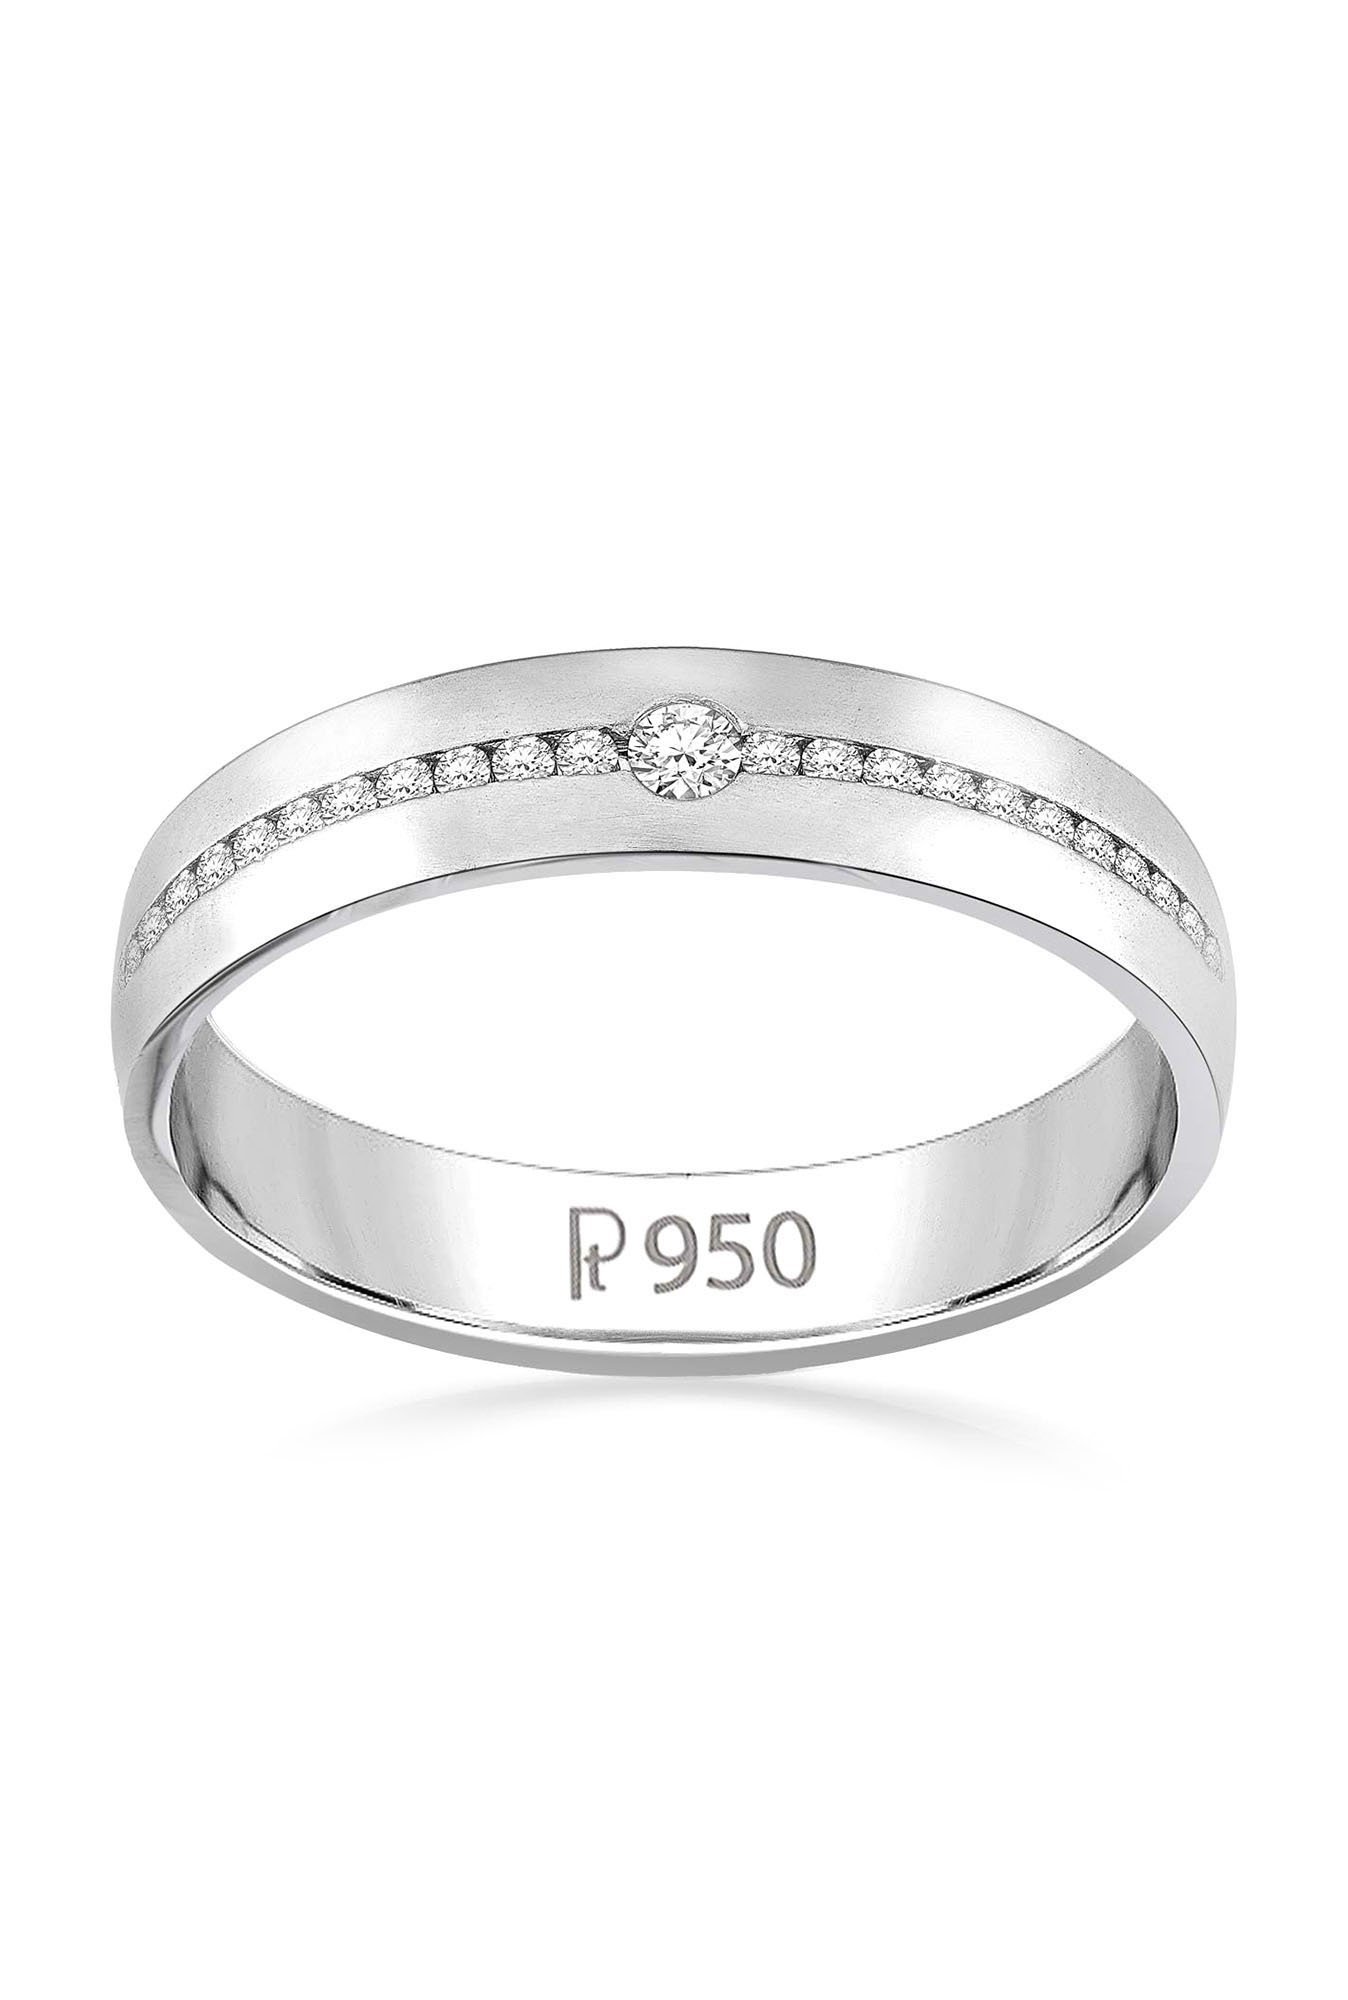 Best Place To Buy Platinum Rings | Buy Platinum Wedding Band |